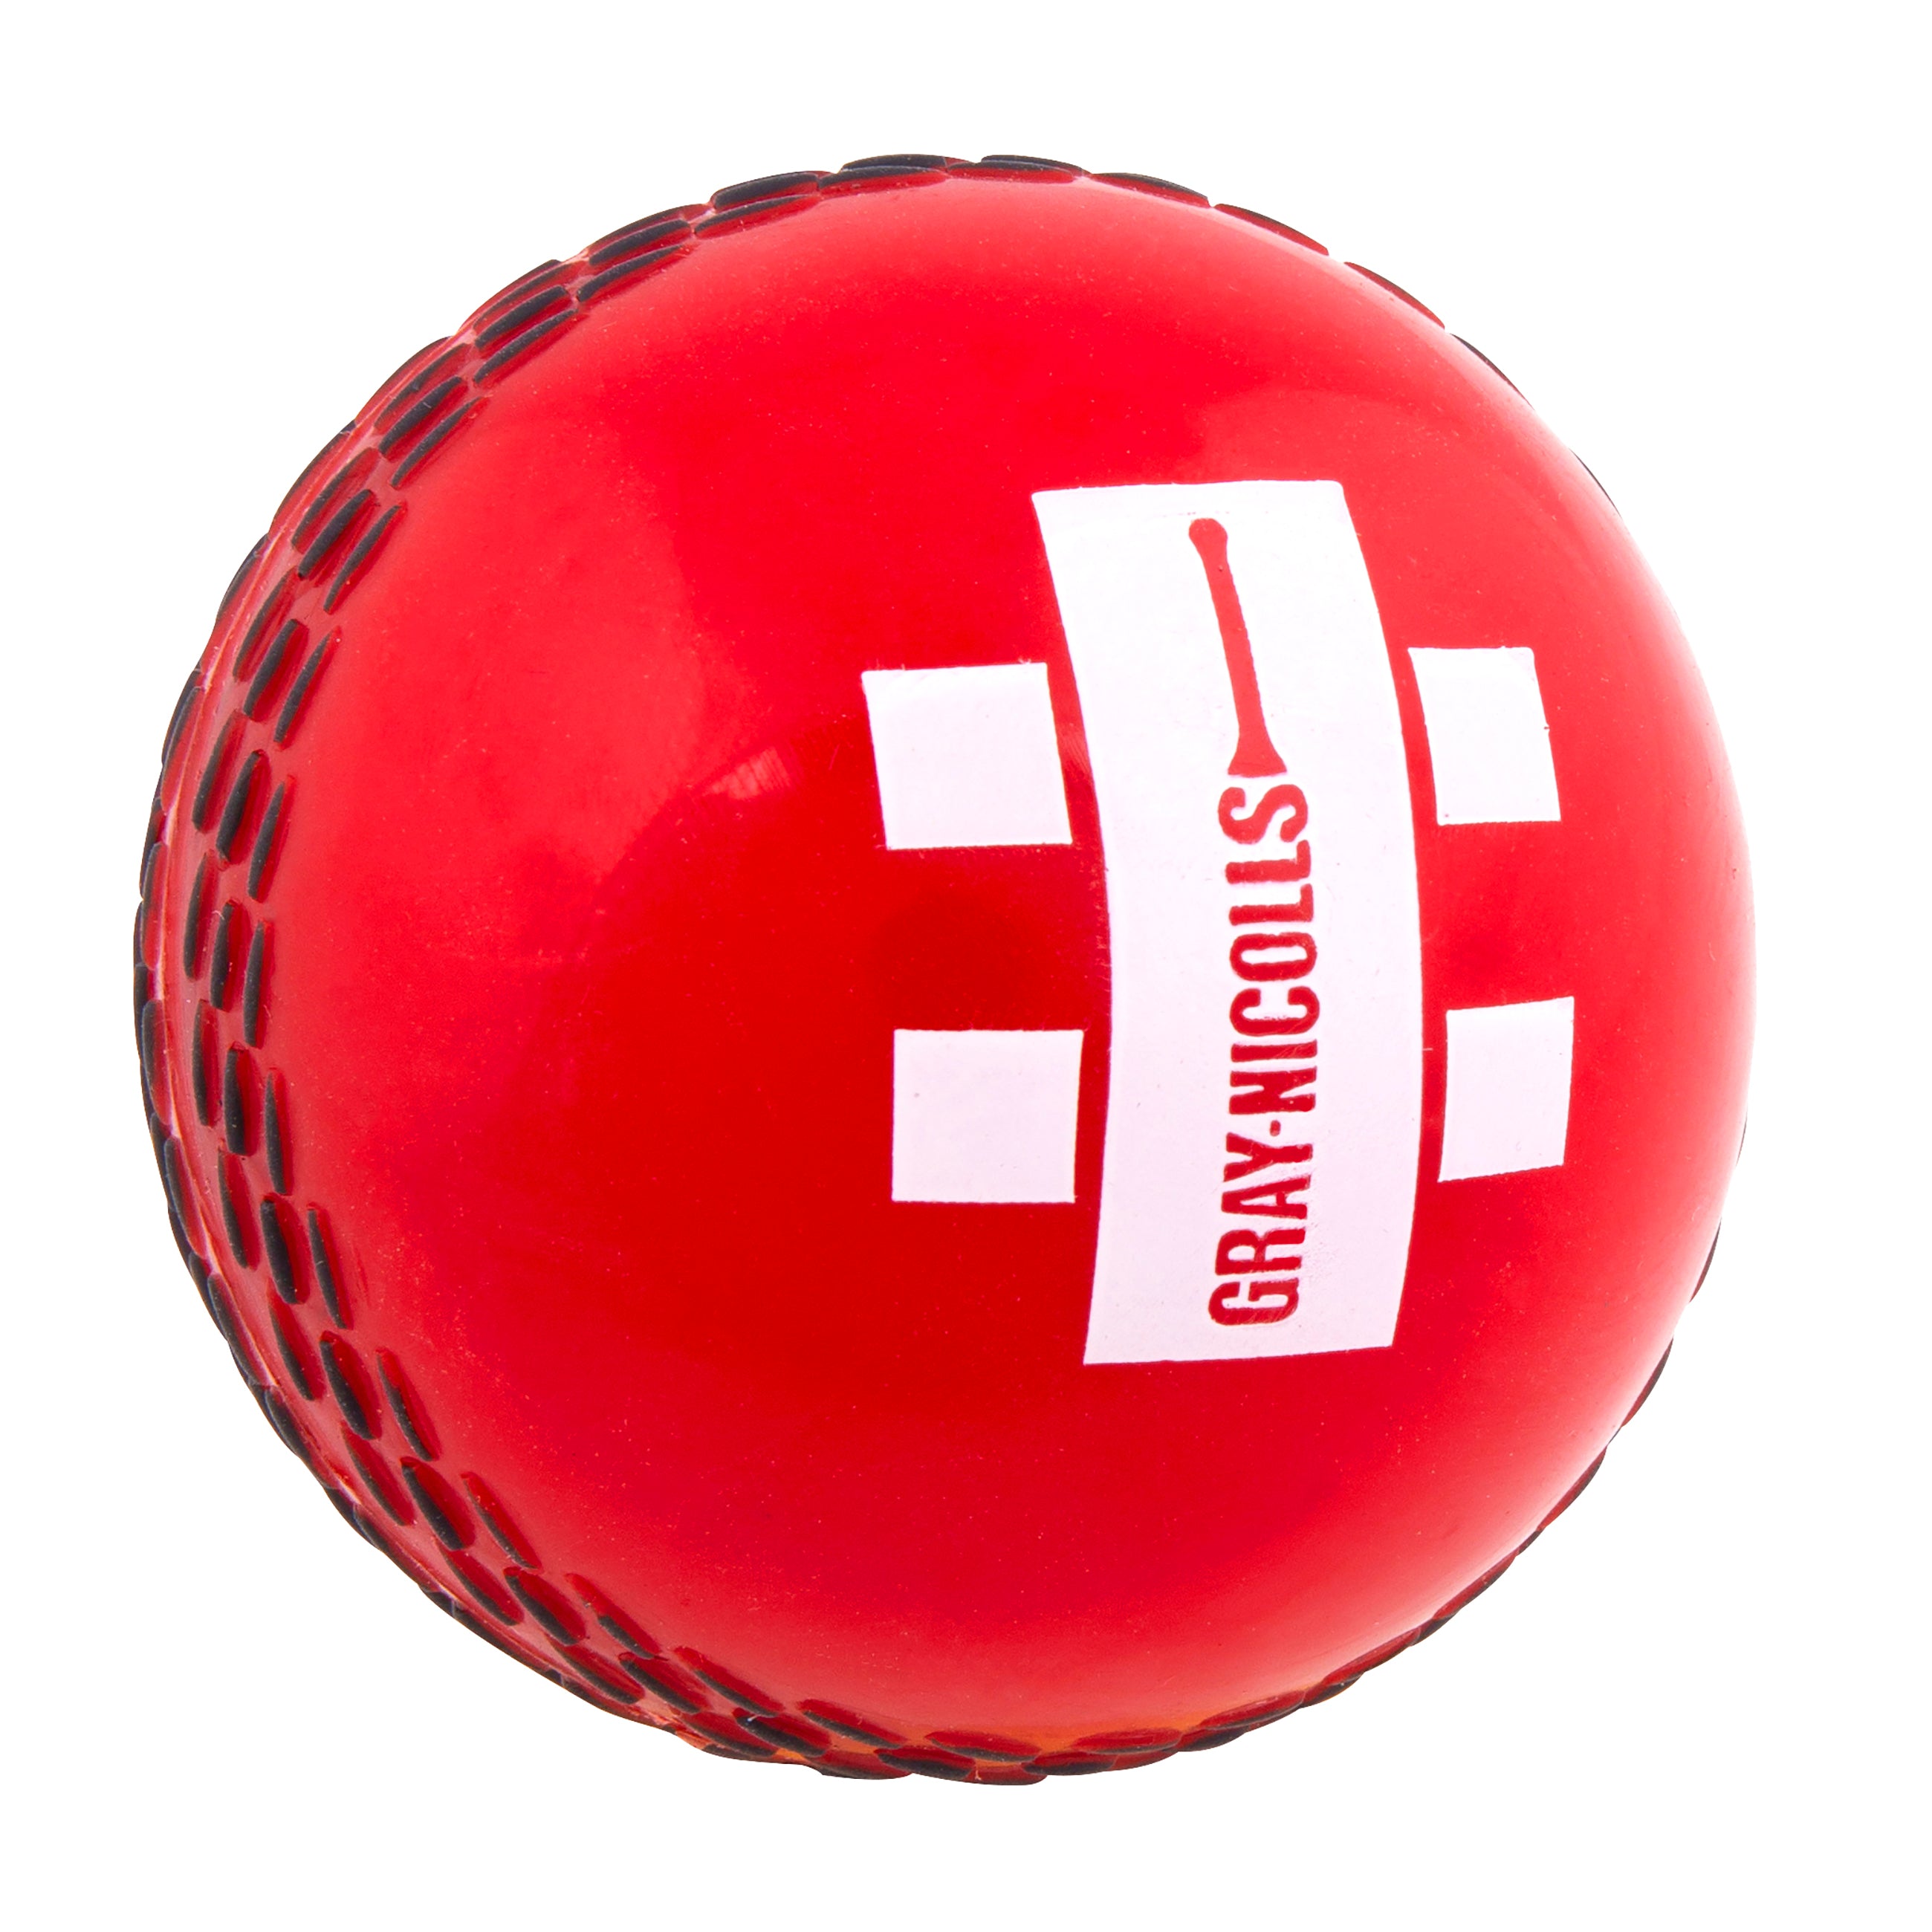 2600 CNBD20 5802556 Plastic Power Play Ball Red, Rear